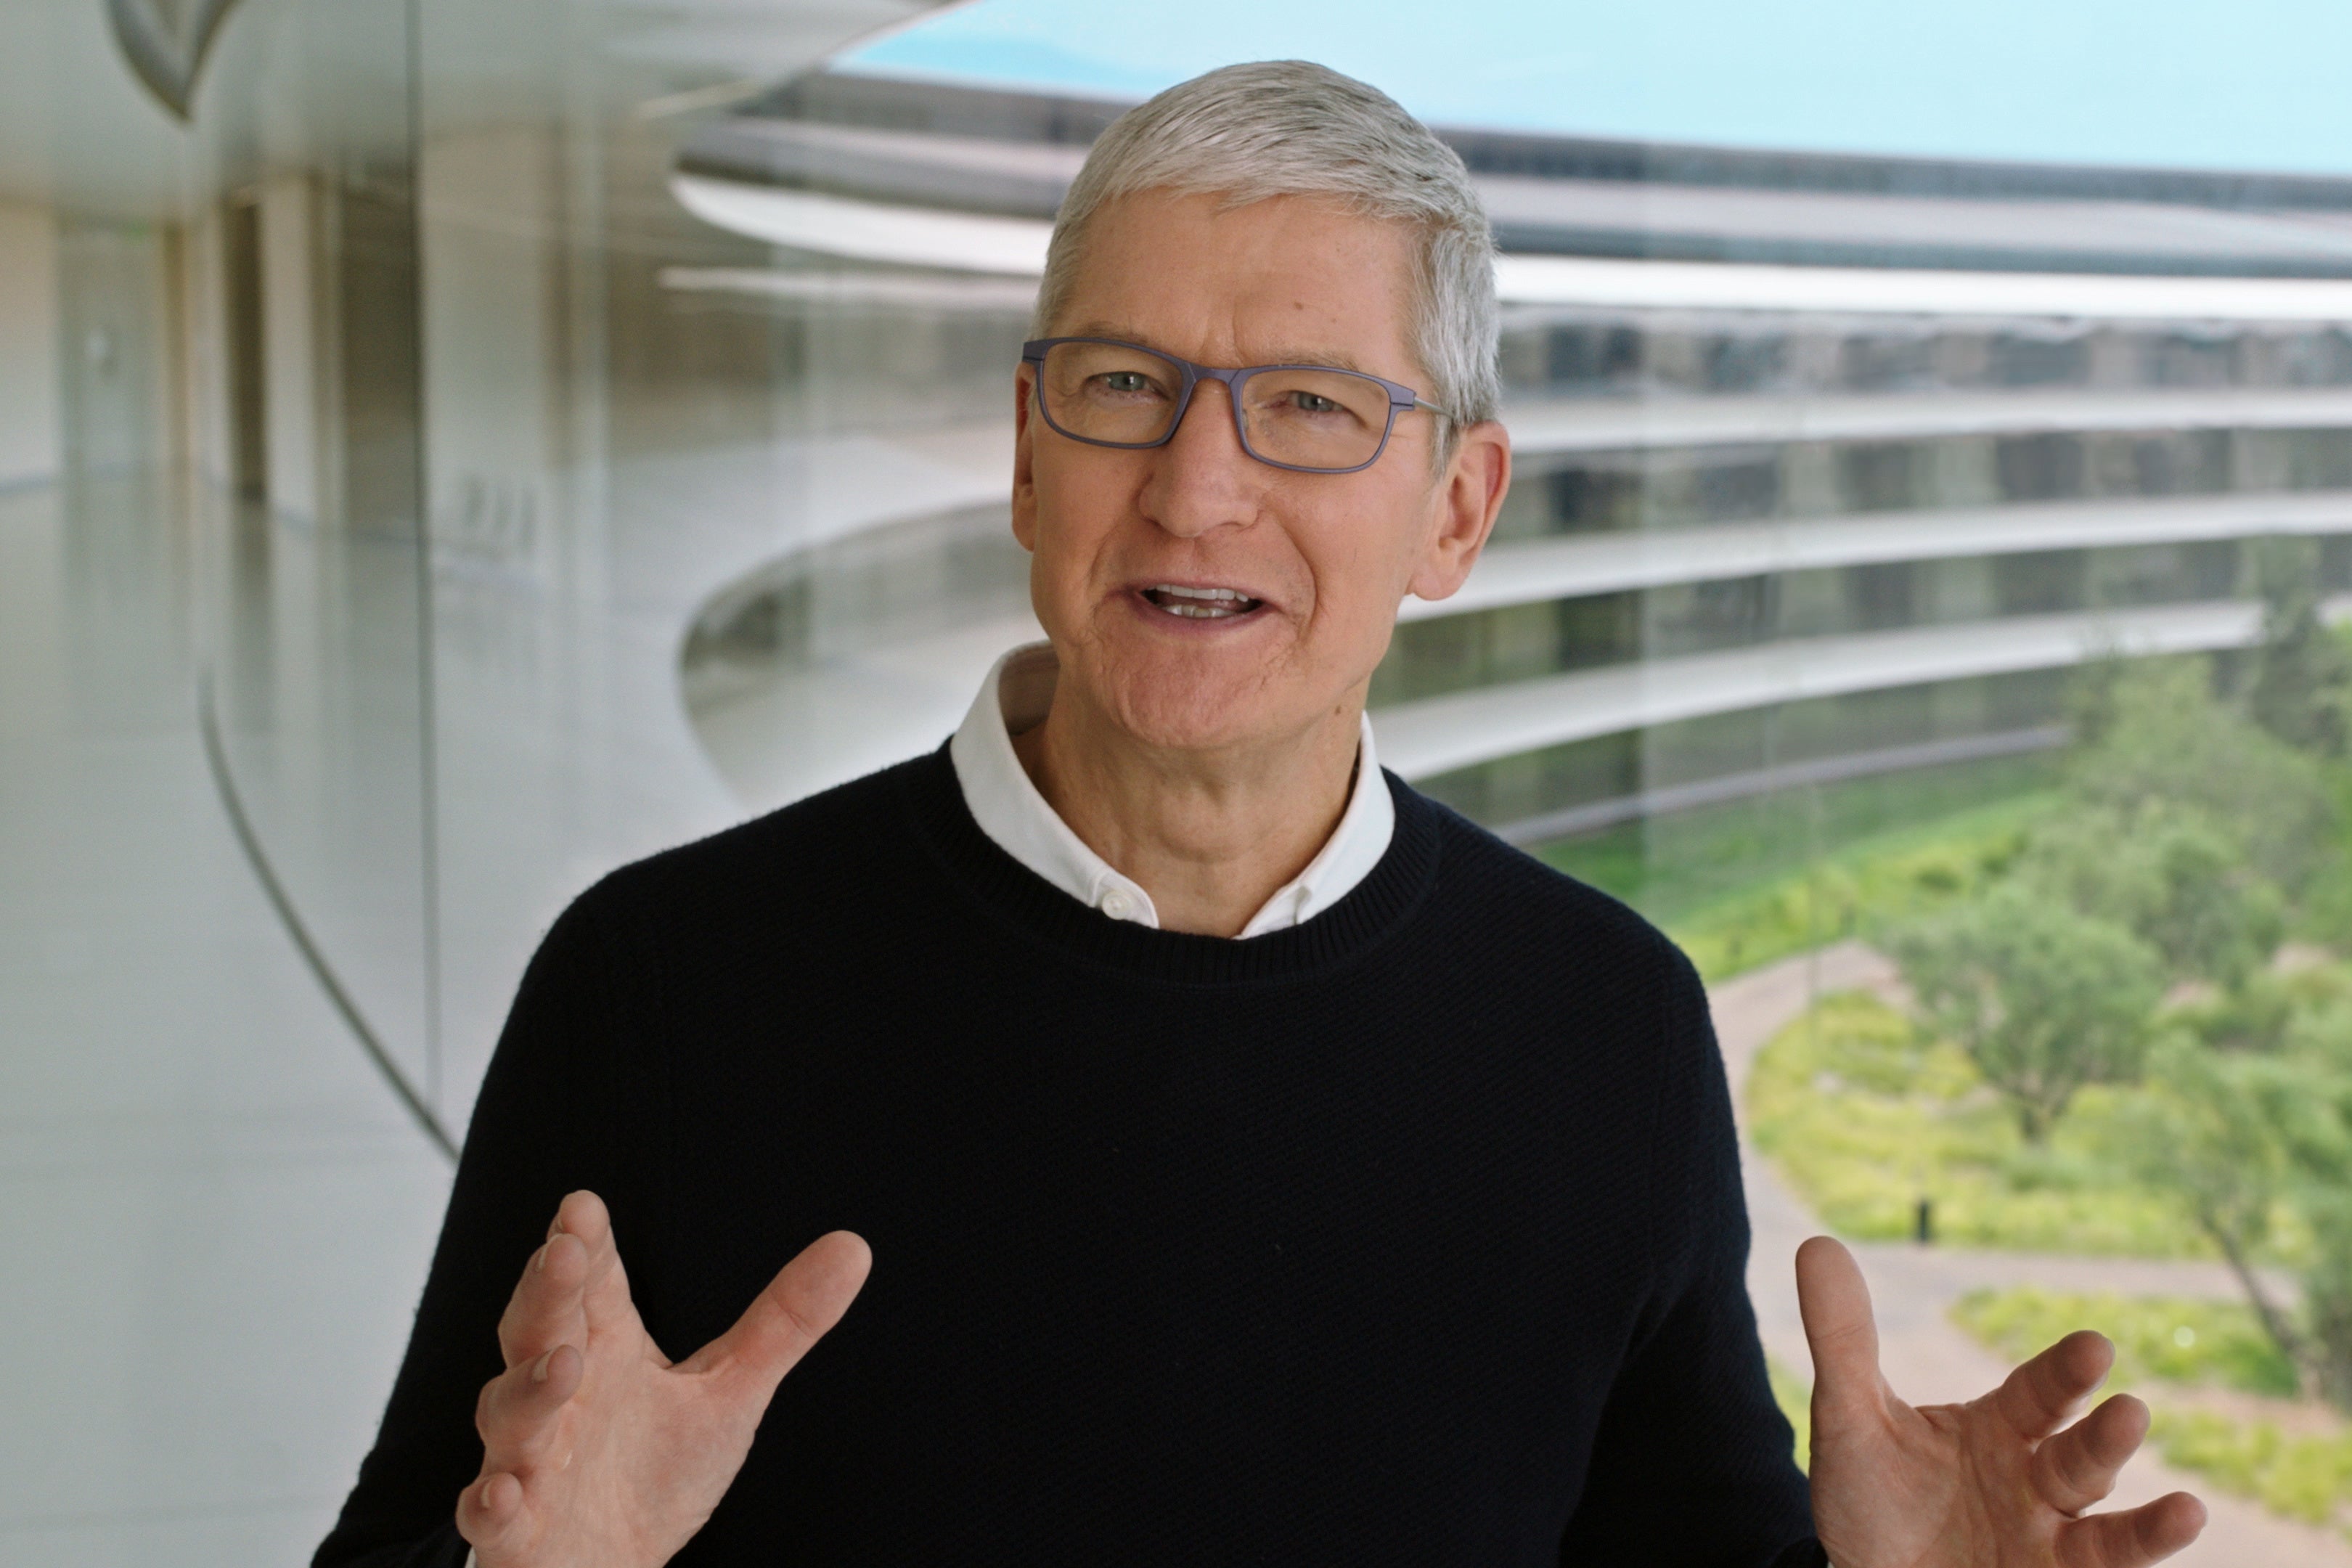 Tim Cook in front of a window showing trees and Apple's headquarters.